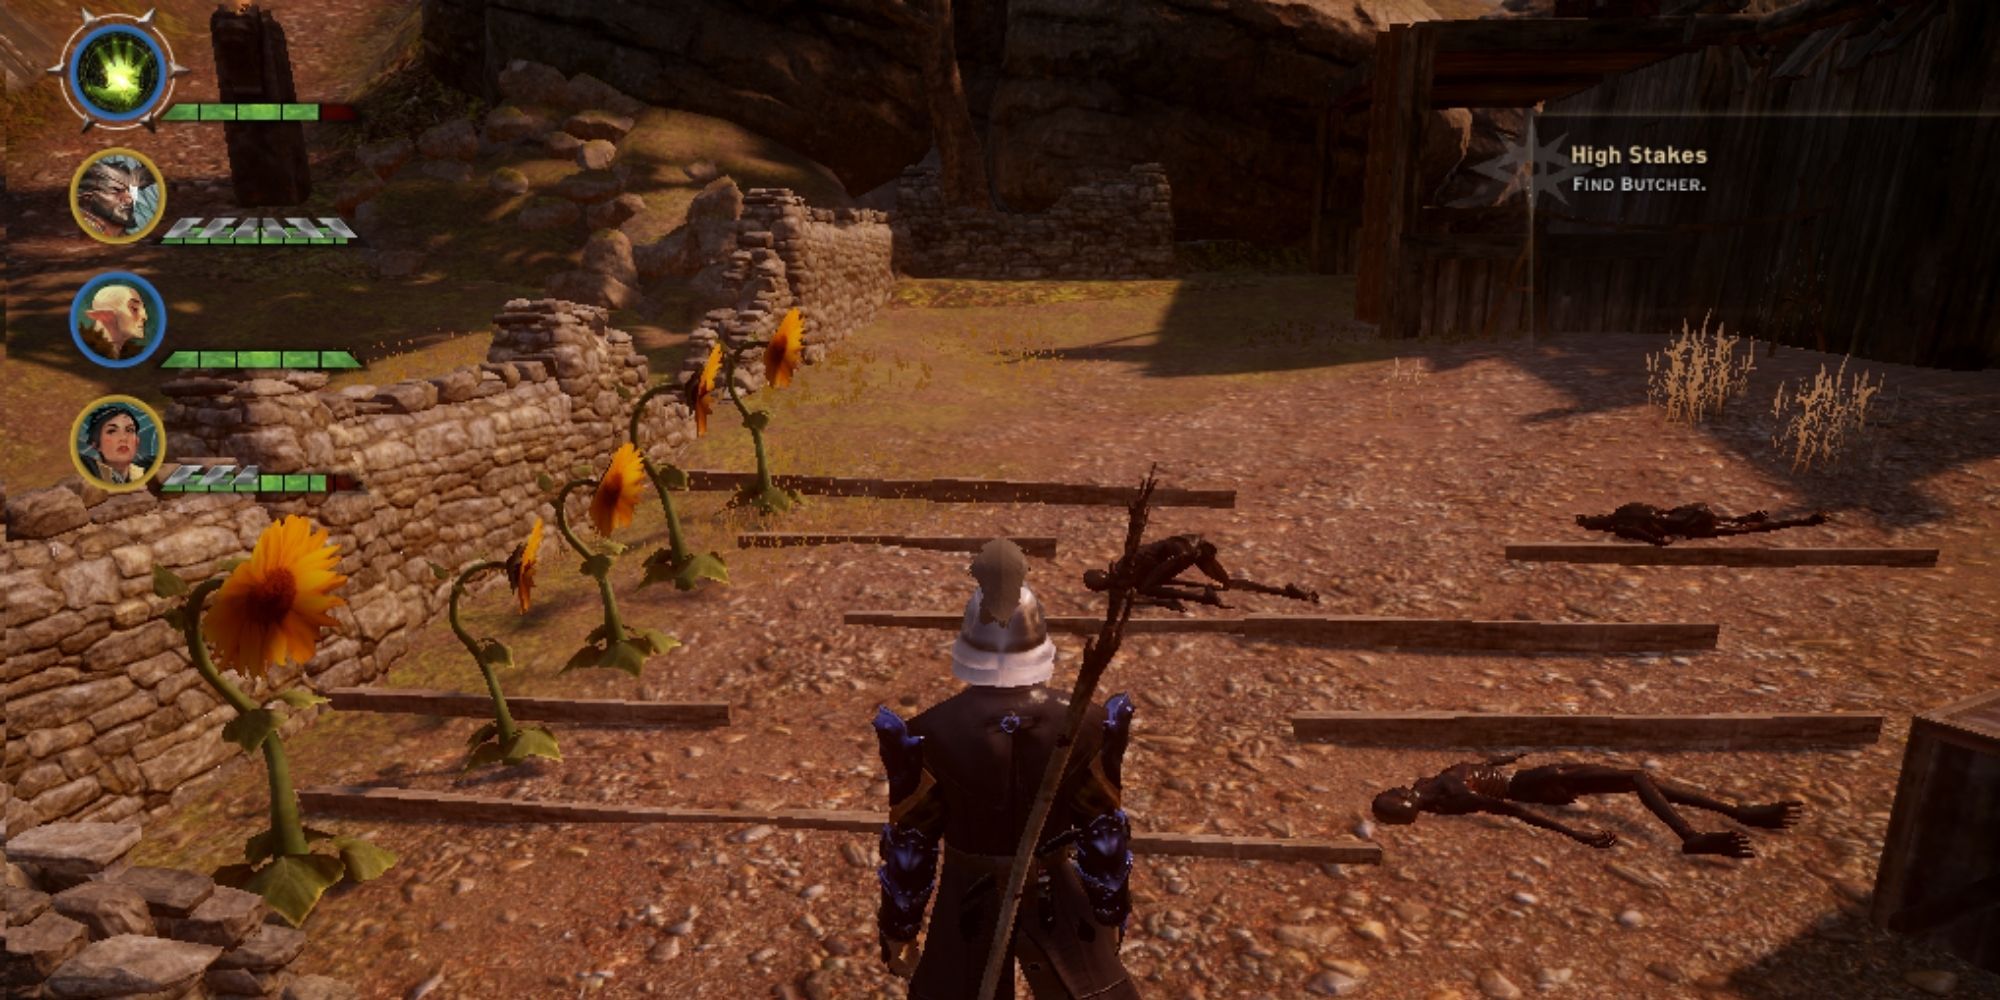 Dragon Age Inquisition gameplay screenshot in Crestwood at Linden Farm